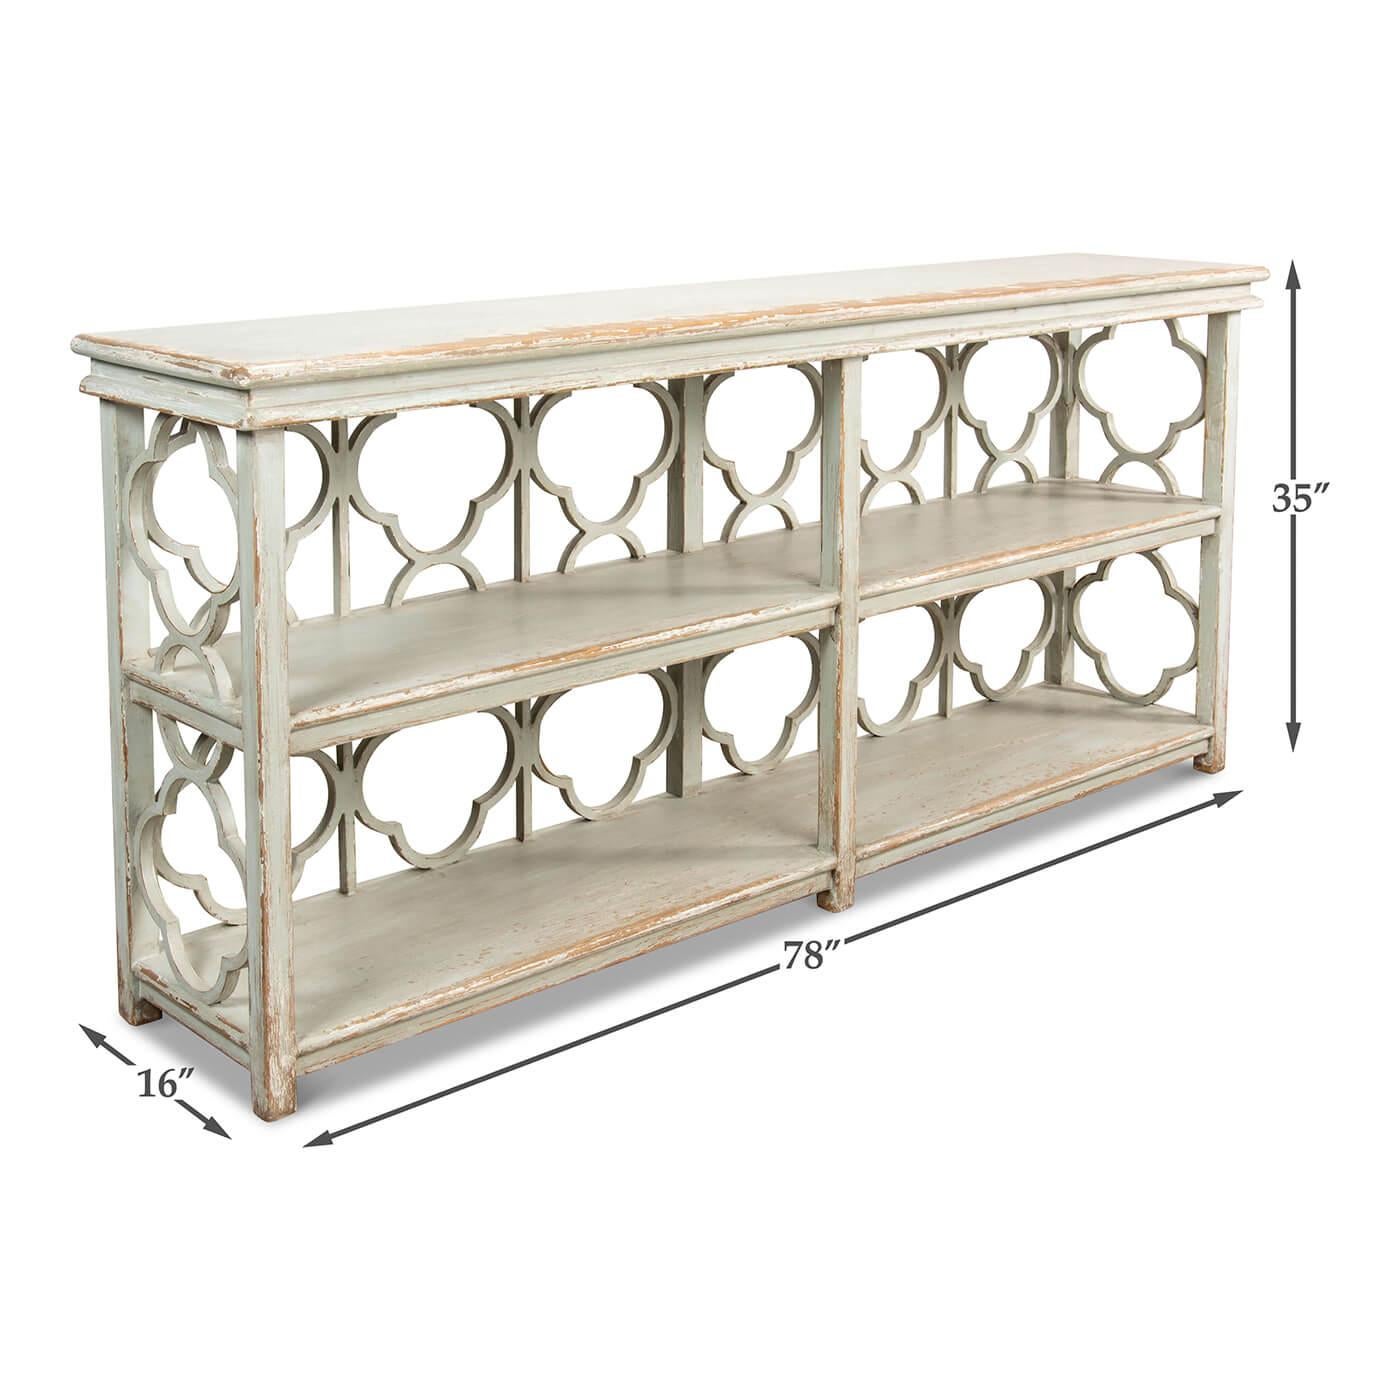 Wood Country Painted Quatrefoil Bookcase For Sale